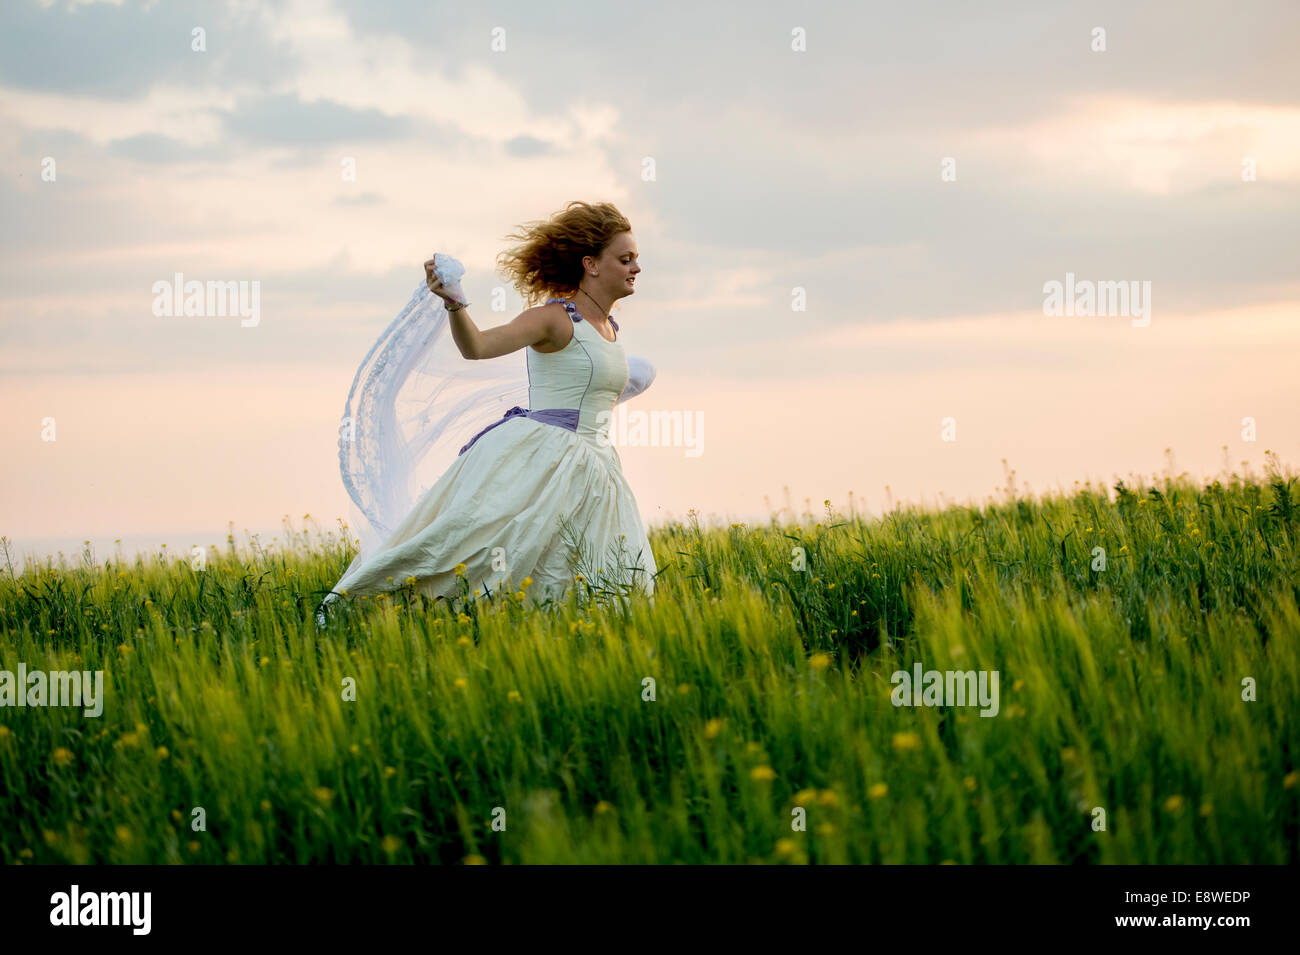 The runaway bride - a young woman girl in a wedding dress running away  fleeing in a field of yellow flowers evening Stock Photo - Alamy